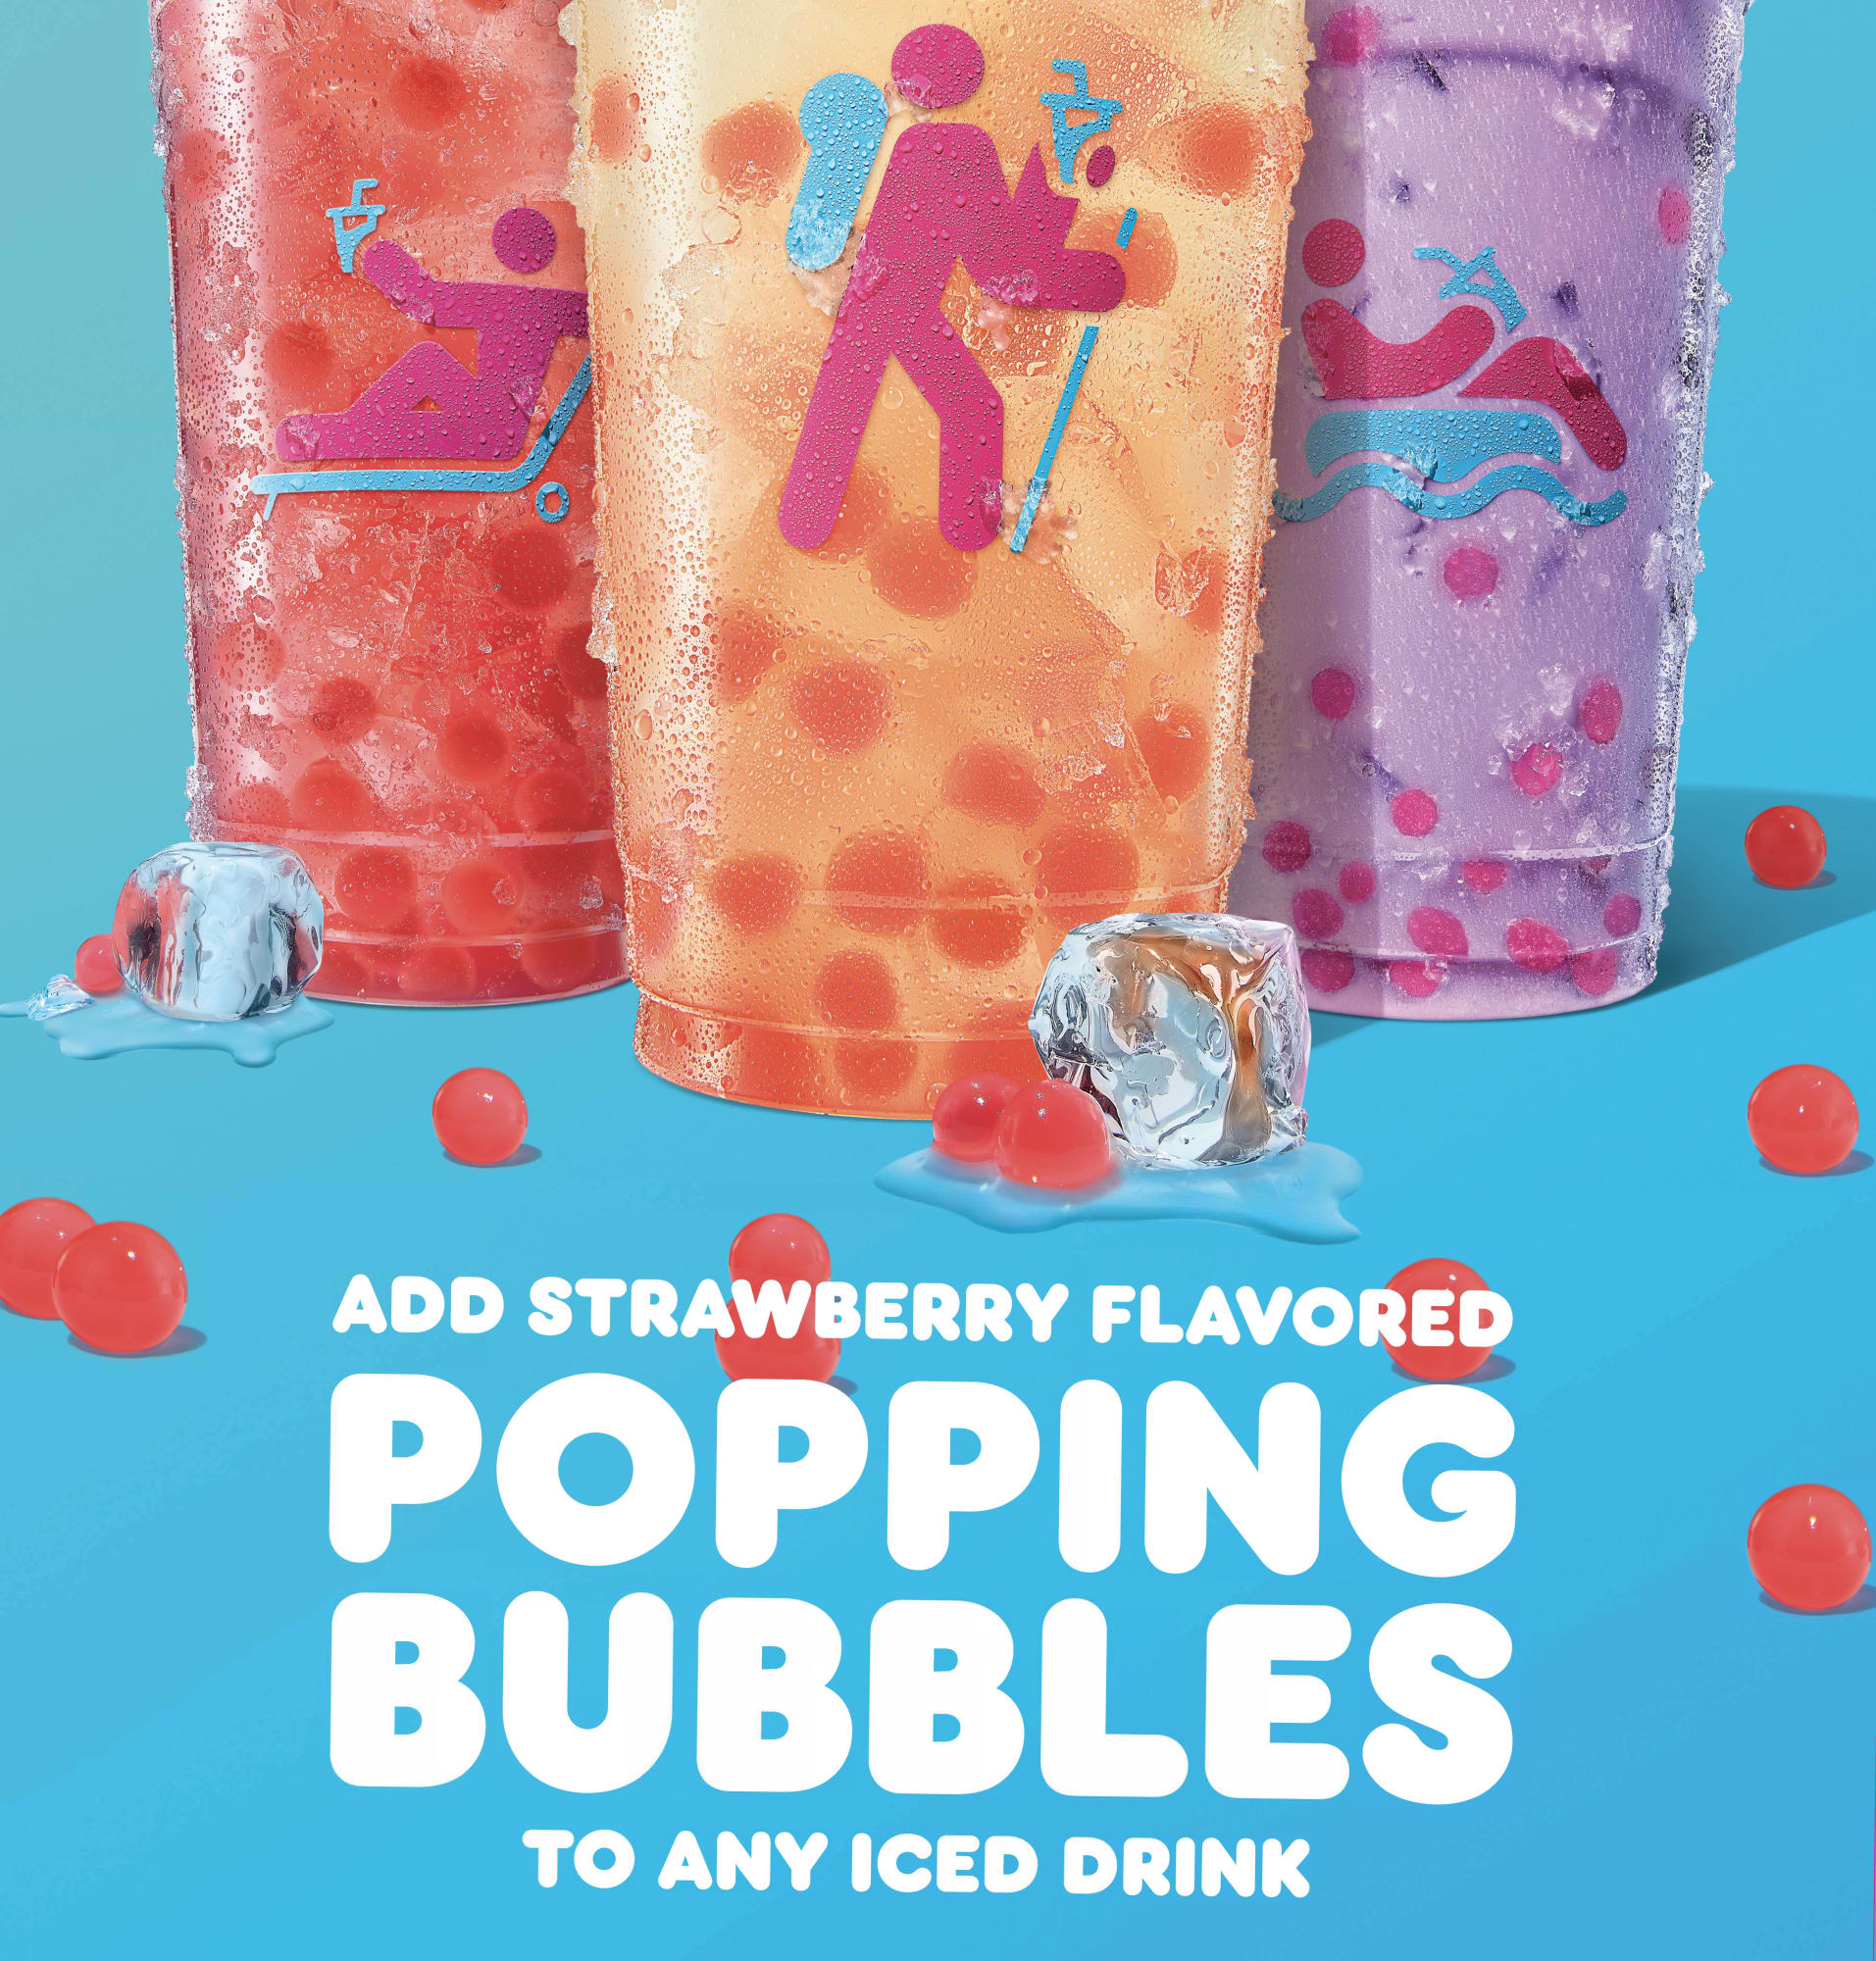 Dunkin Strawberry Popping Bubbles makes its drinks even cooler